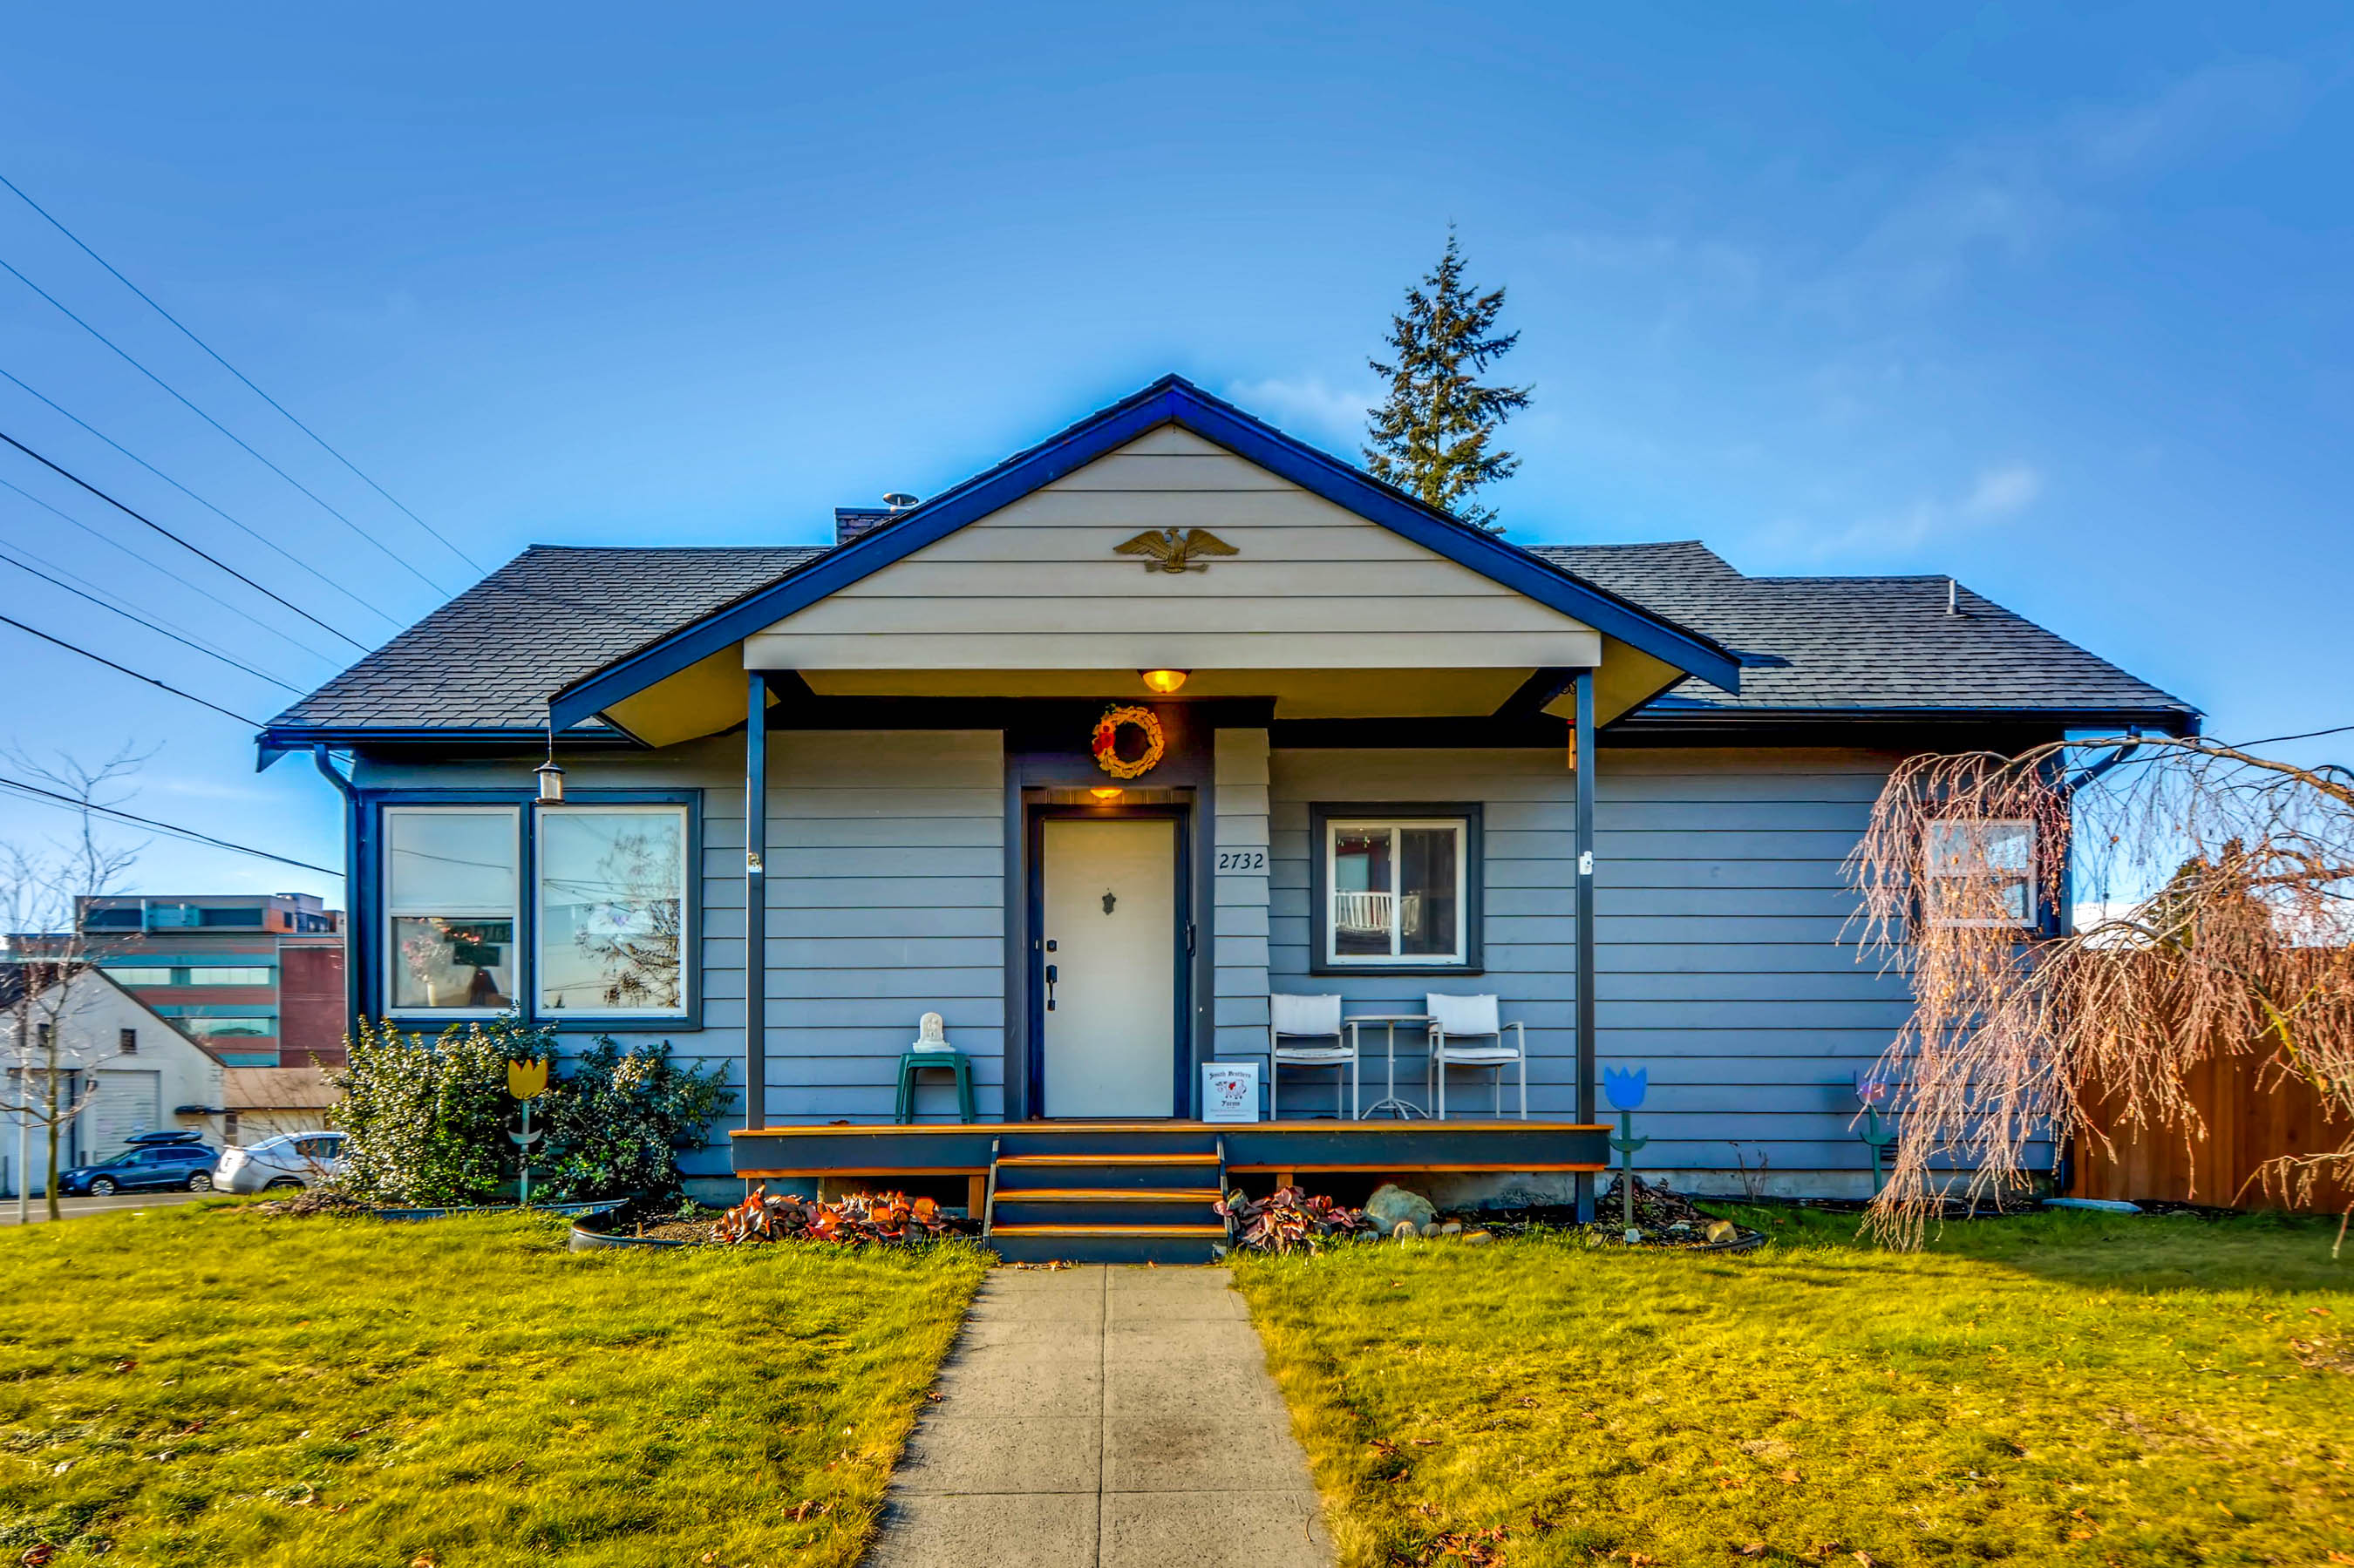 Charming 1940s Home For Sale in Everett WA